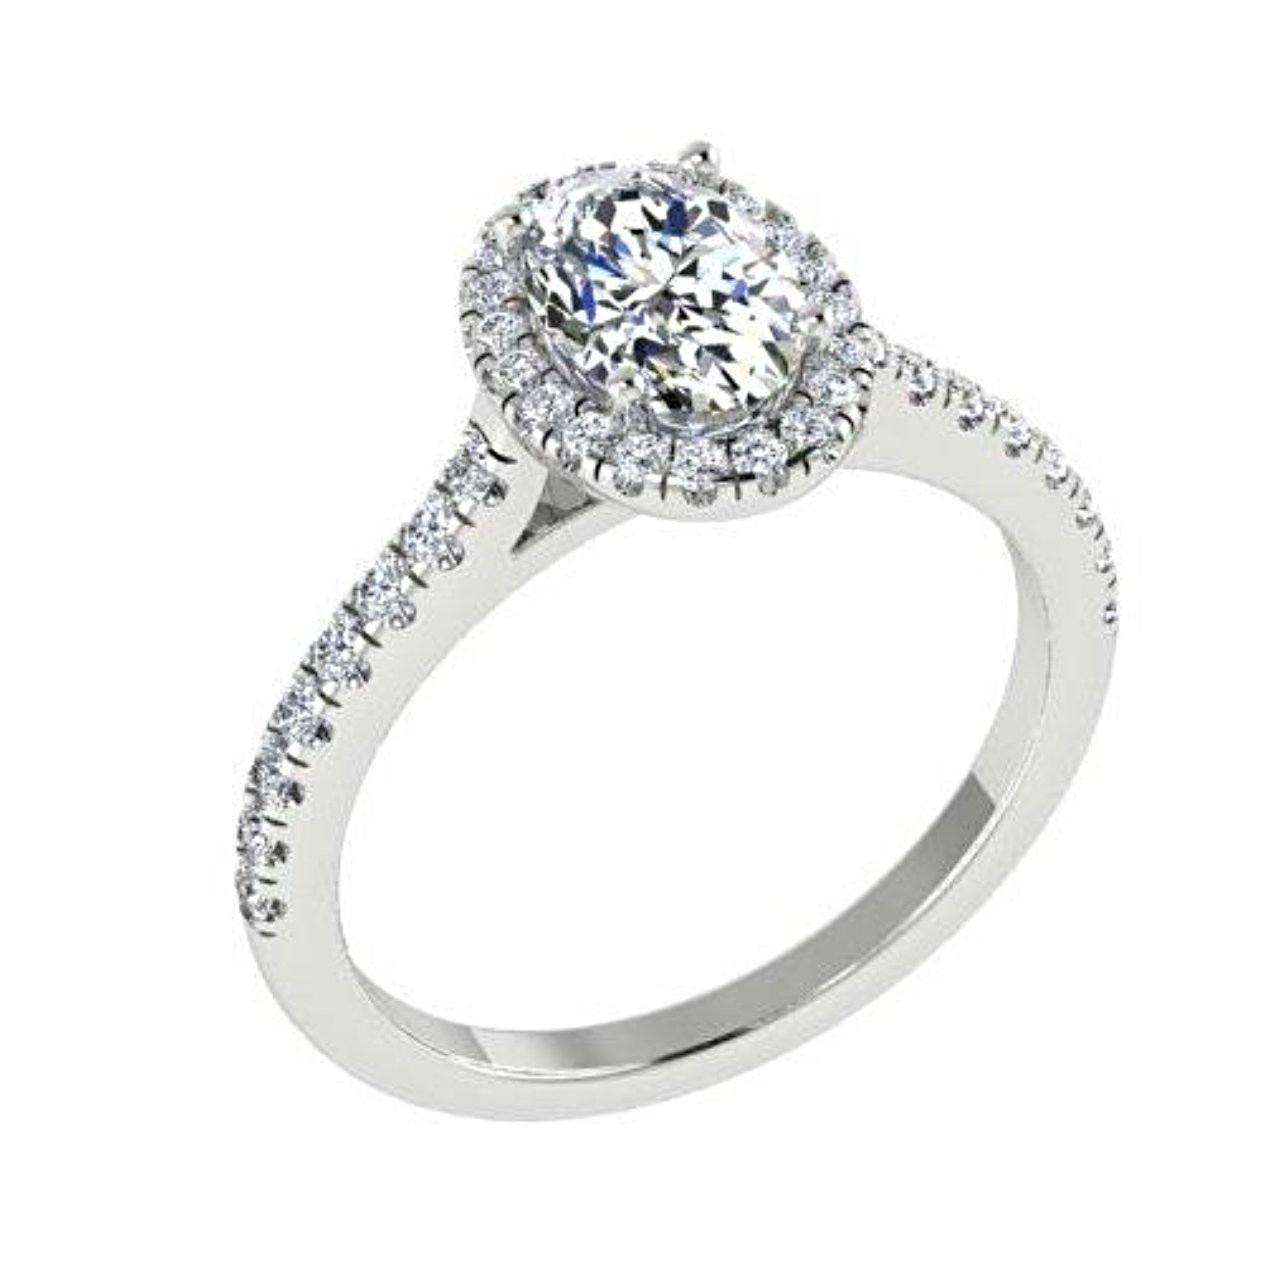 Oval Diamond Halo Engagement Ring with Side Stones 18K White Gold - Thenetjeweler